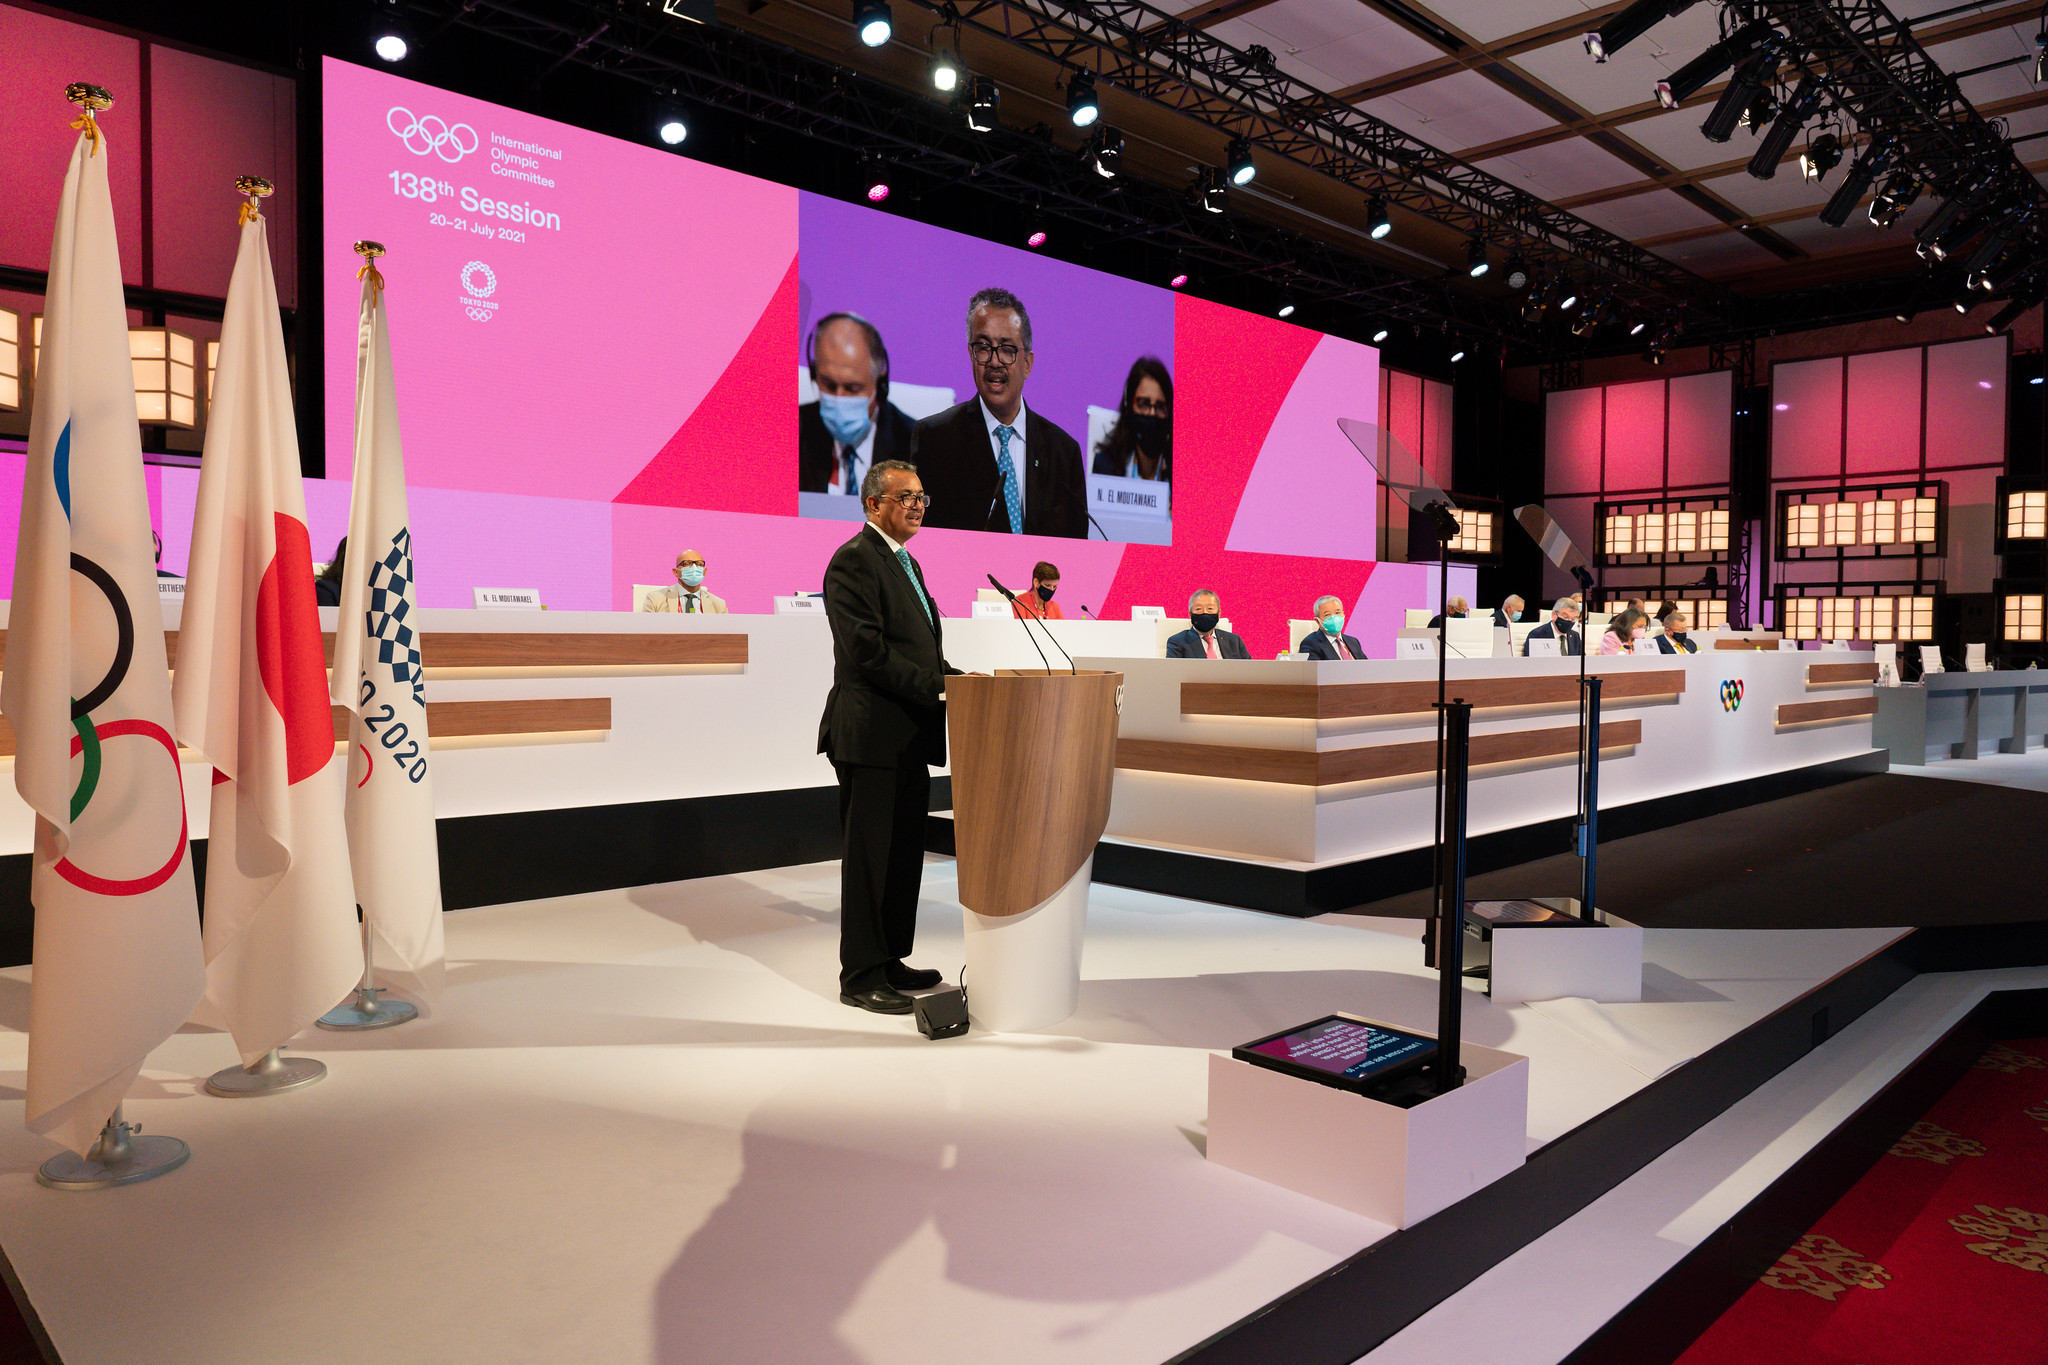 Dr Tedros issued a call for greater vaccine equity around the world to combat COVID-19 ©IOC